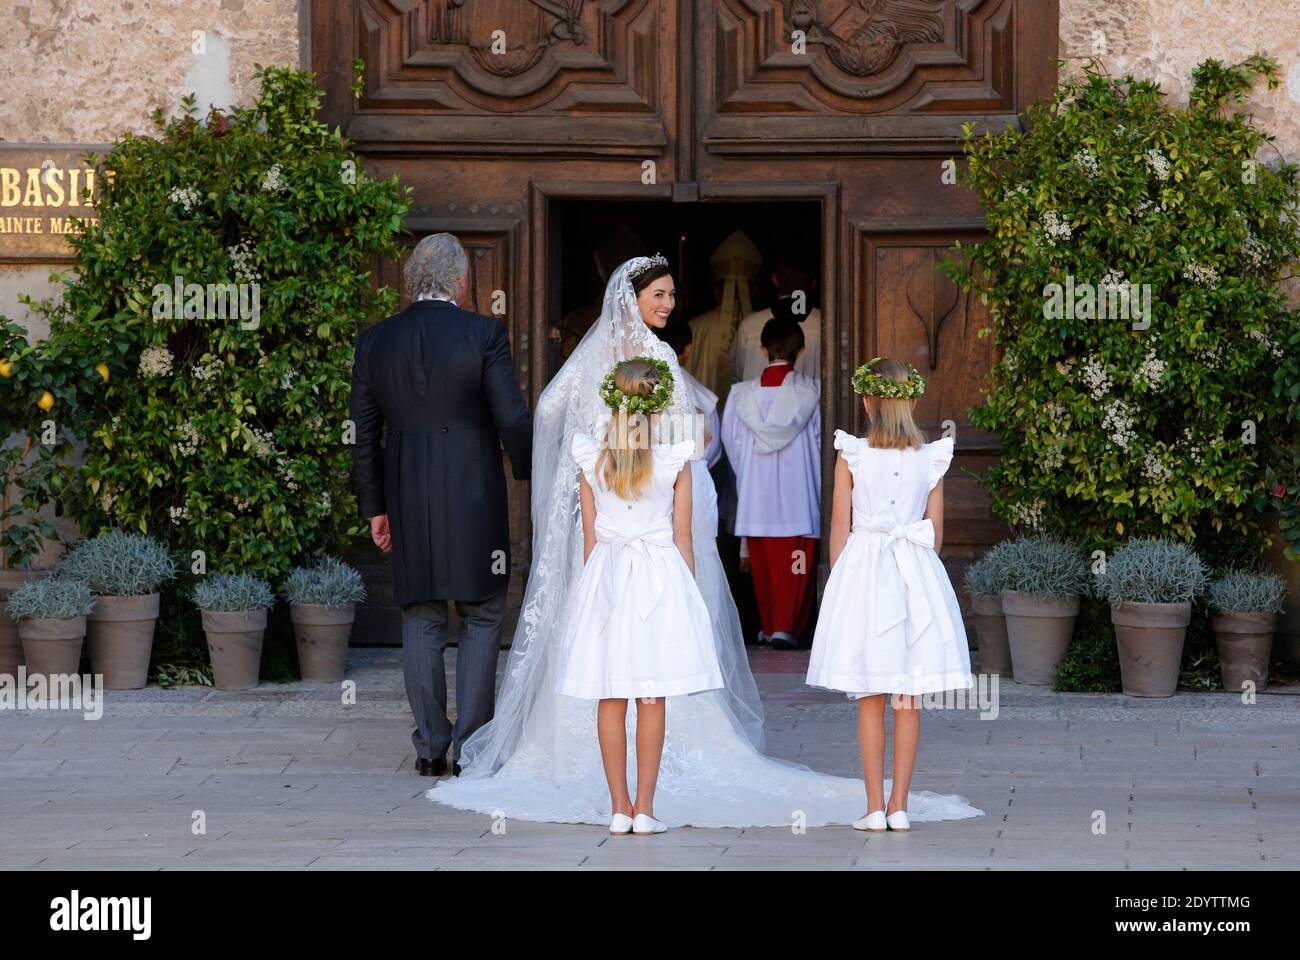 The bride Claire Lademacher arriving with her father Hartmut Lademacher for her religious wedding to Prince Felix of Luxembourg at Sainte-Marie-Madeleine basilica, in Saint-Maximin-la-Sainte-Baume, southern France on September 21, 2013. Photo by ABACAPRESS.COM Stock Photo